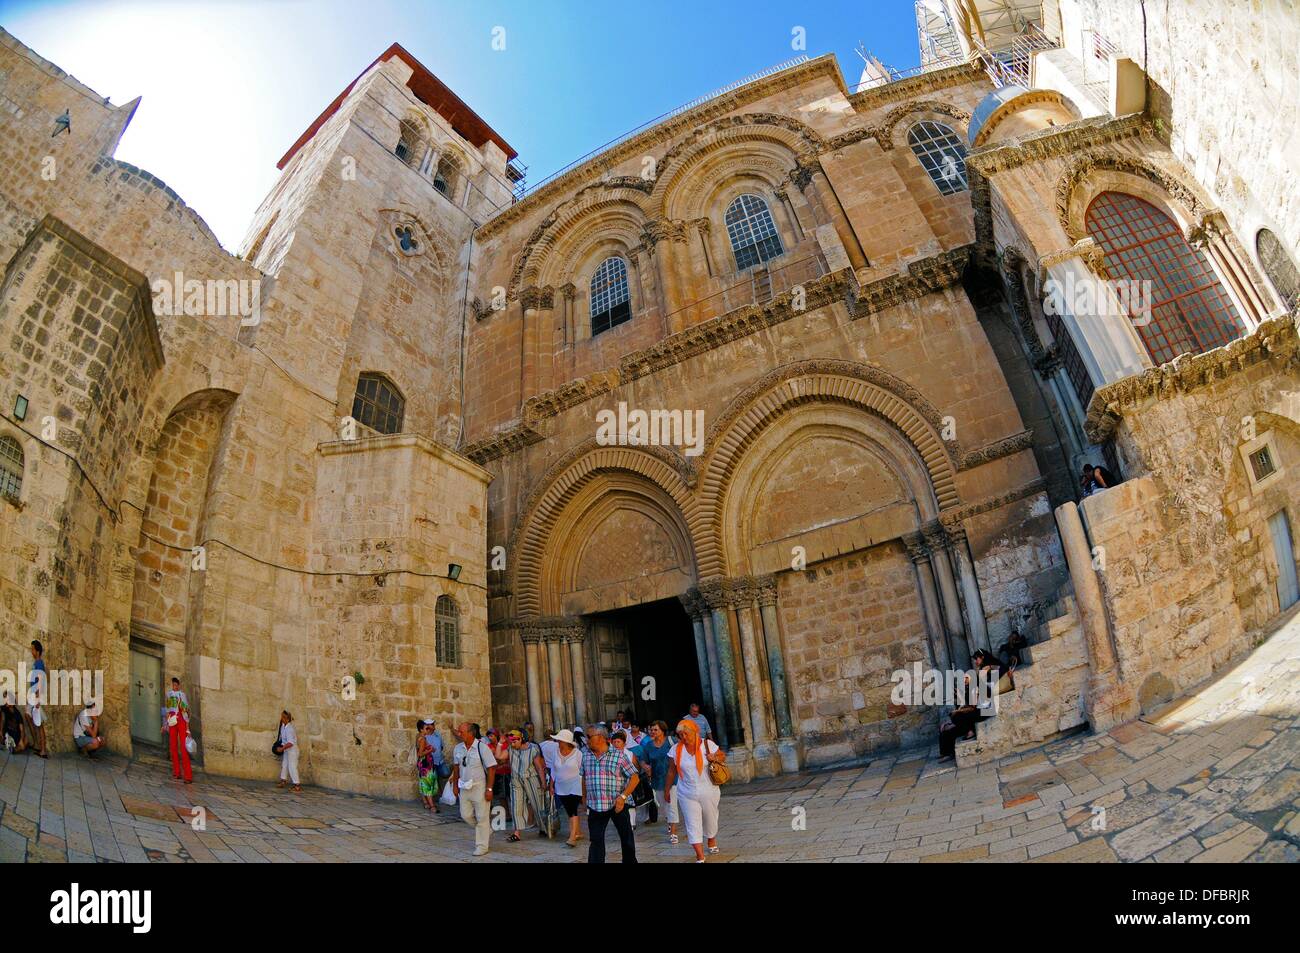 View of the entrance of the Church of the Holy Sepulchre, which contains the last five stations of the Via Dolorosa, in Jerusalem, Israel, 12 September 2013. The Via Dolorosa (Way of Suffering) is a street in the old town of Jerusalem named after the path Jesus of Nazareth walked to his crucification. Jesus carried the cross, on which he later died via that road from the Antonia Fortress, then seat of Pilate, to Golgotha, the place where his grave is supposedly located. Above this place, the Church of the Holy Sepulchre was later built. The path led Jesus via 14 stations that are often visited Stock Photo